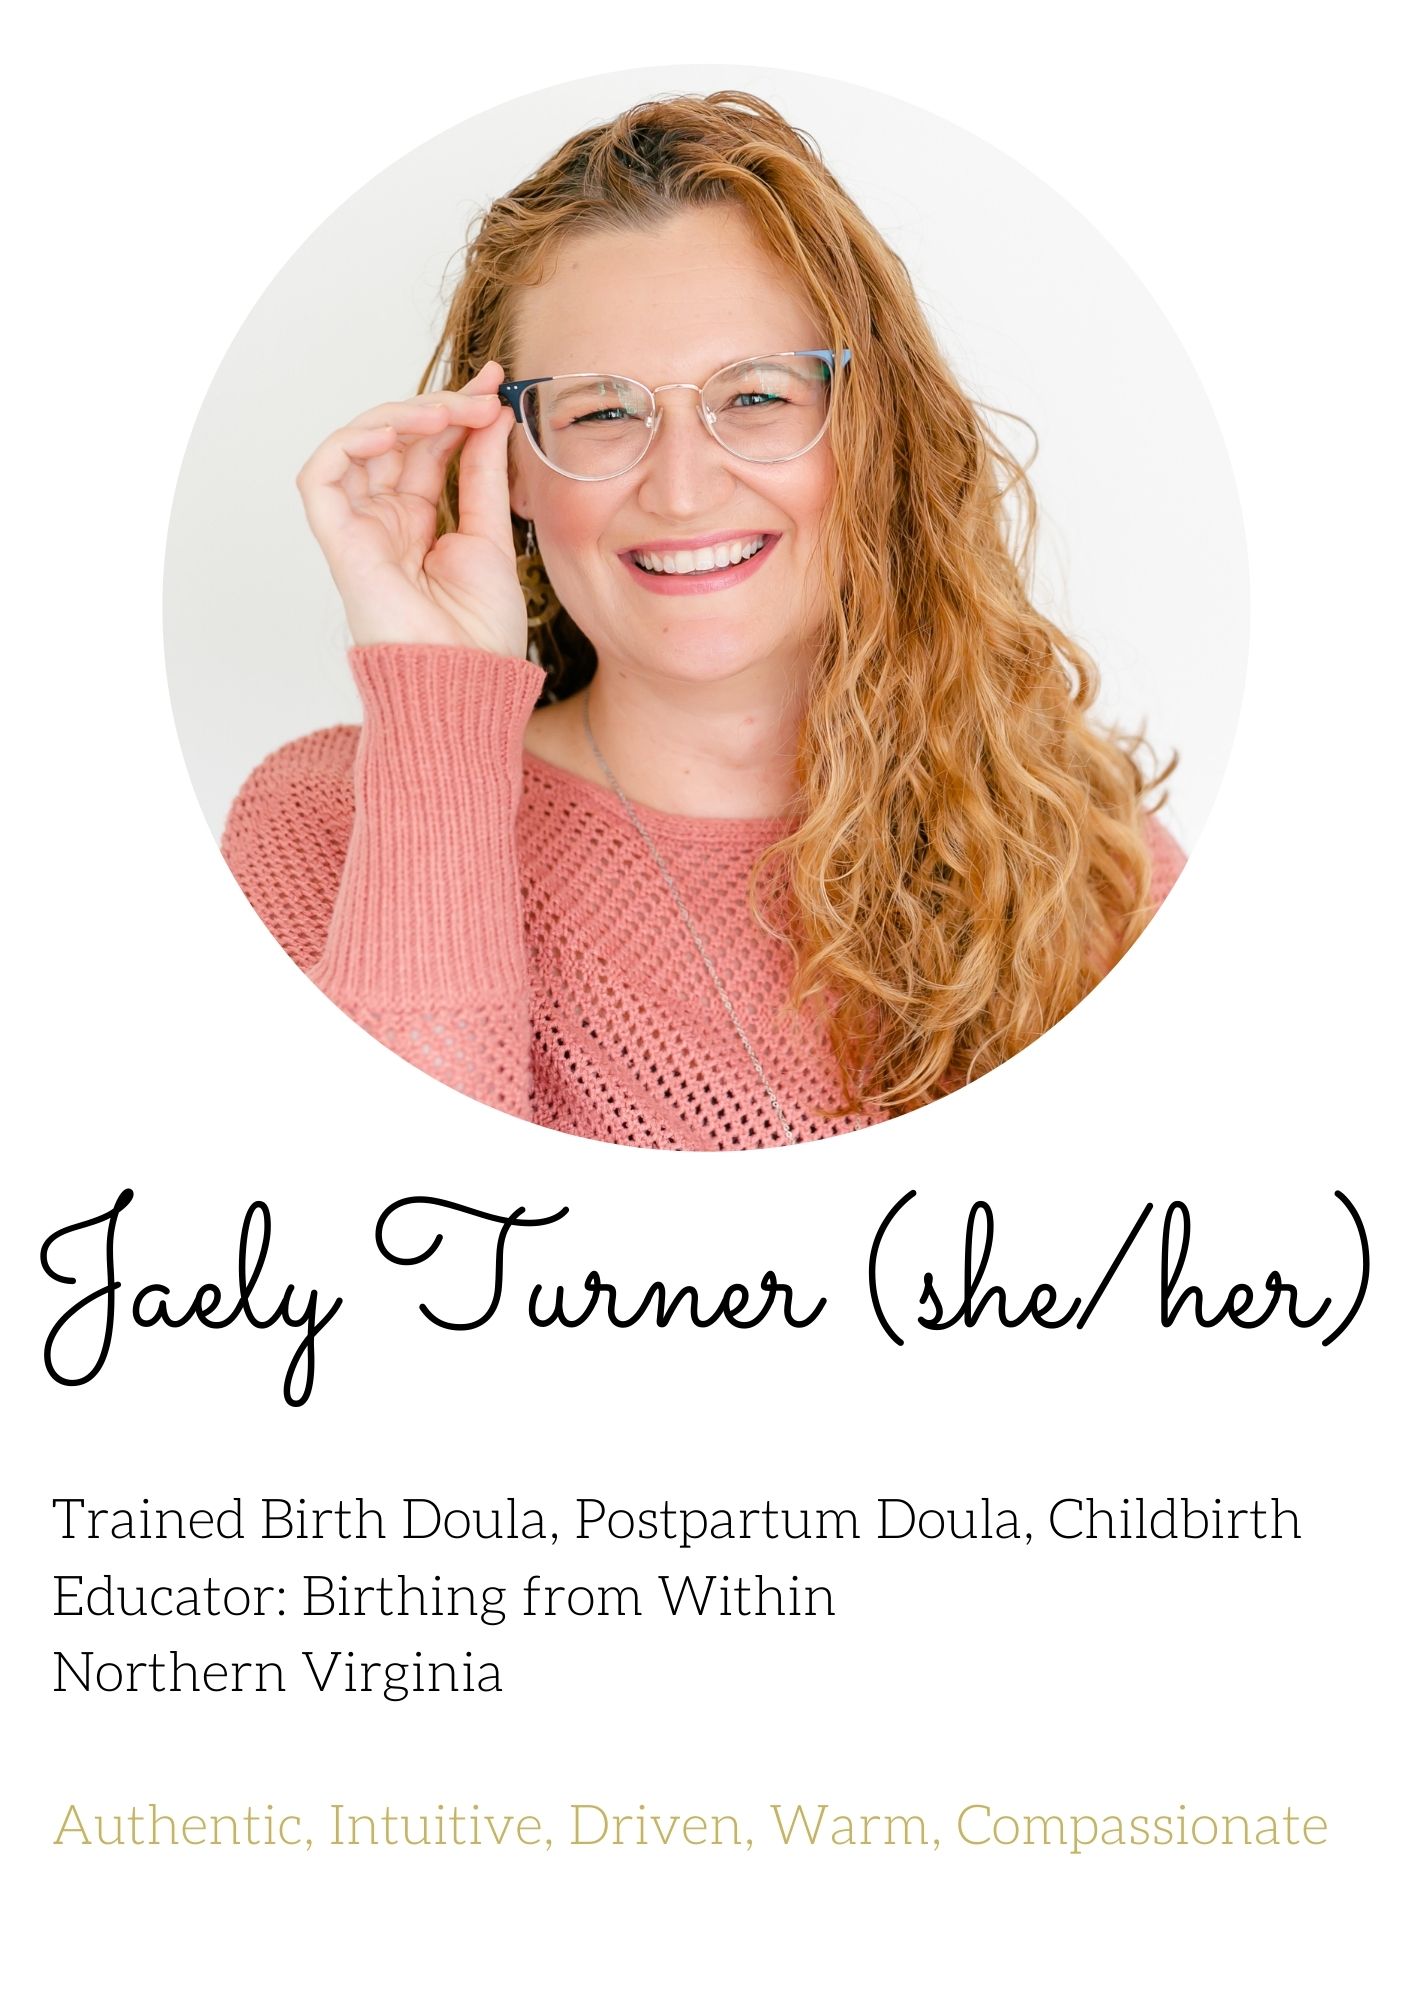 jaely turner birth and postpartum doula experienced nothern va dc